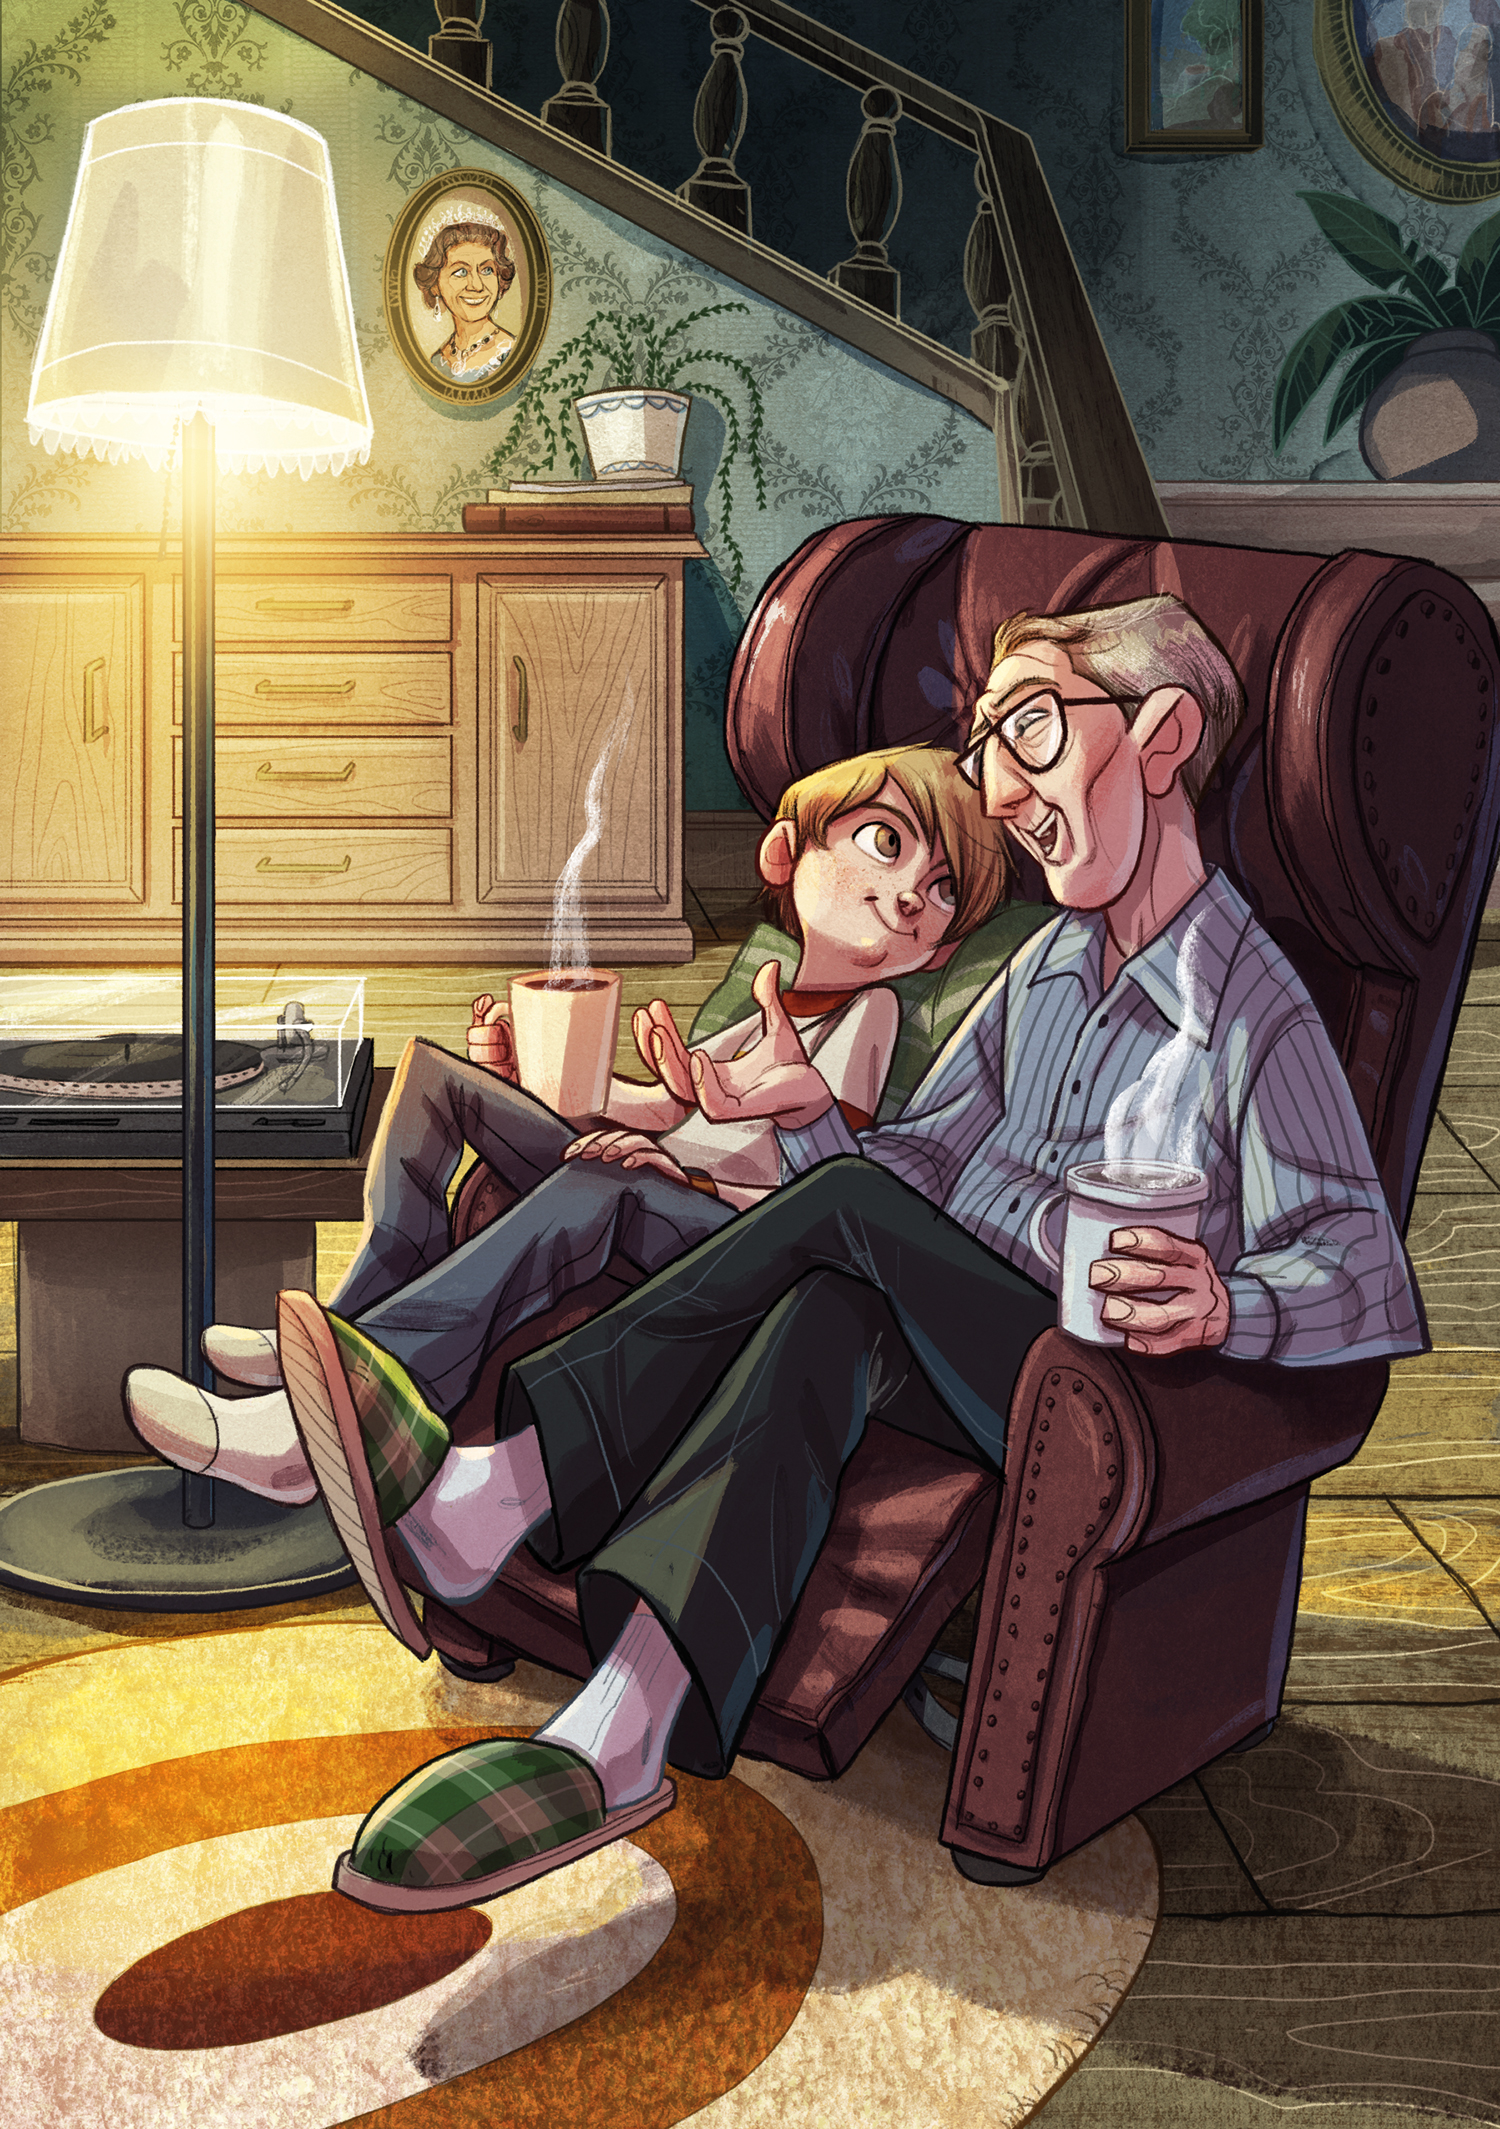 An illustration by Mónica Armiño from the book Billy and the Giant Adventure by Jamie Oliver. It shows the main character Billy sitting with his grandfather, drinking some hot chocolate together at home.